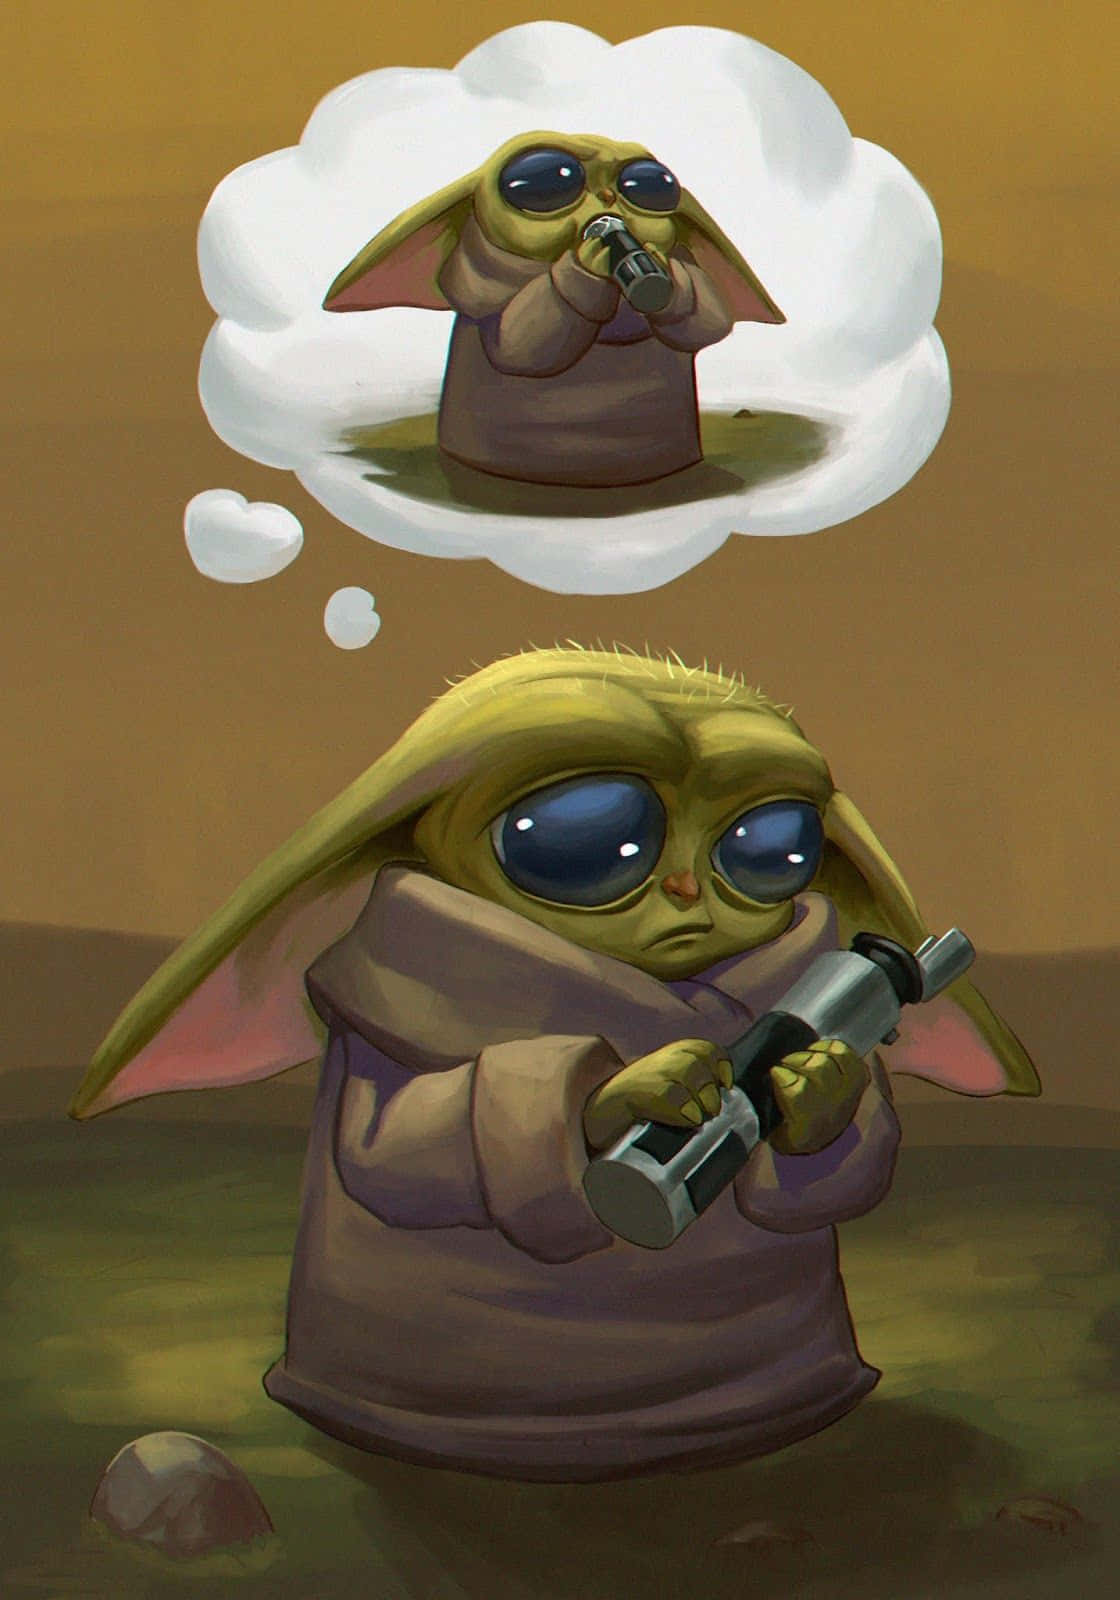 "Enjoy the cuteness of Baby Yoda with the latest phone" Wallpaper